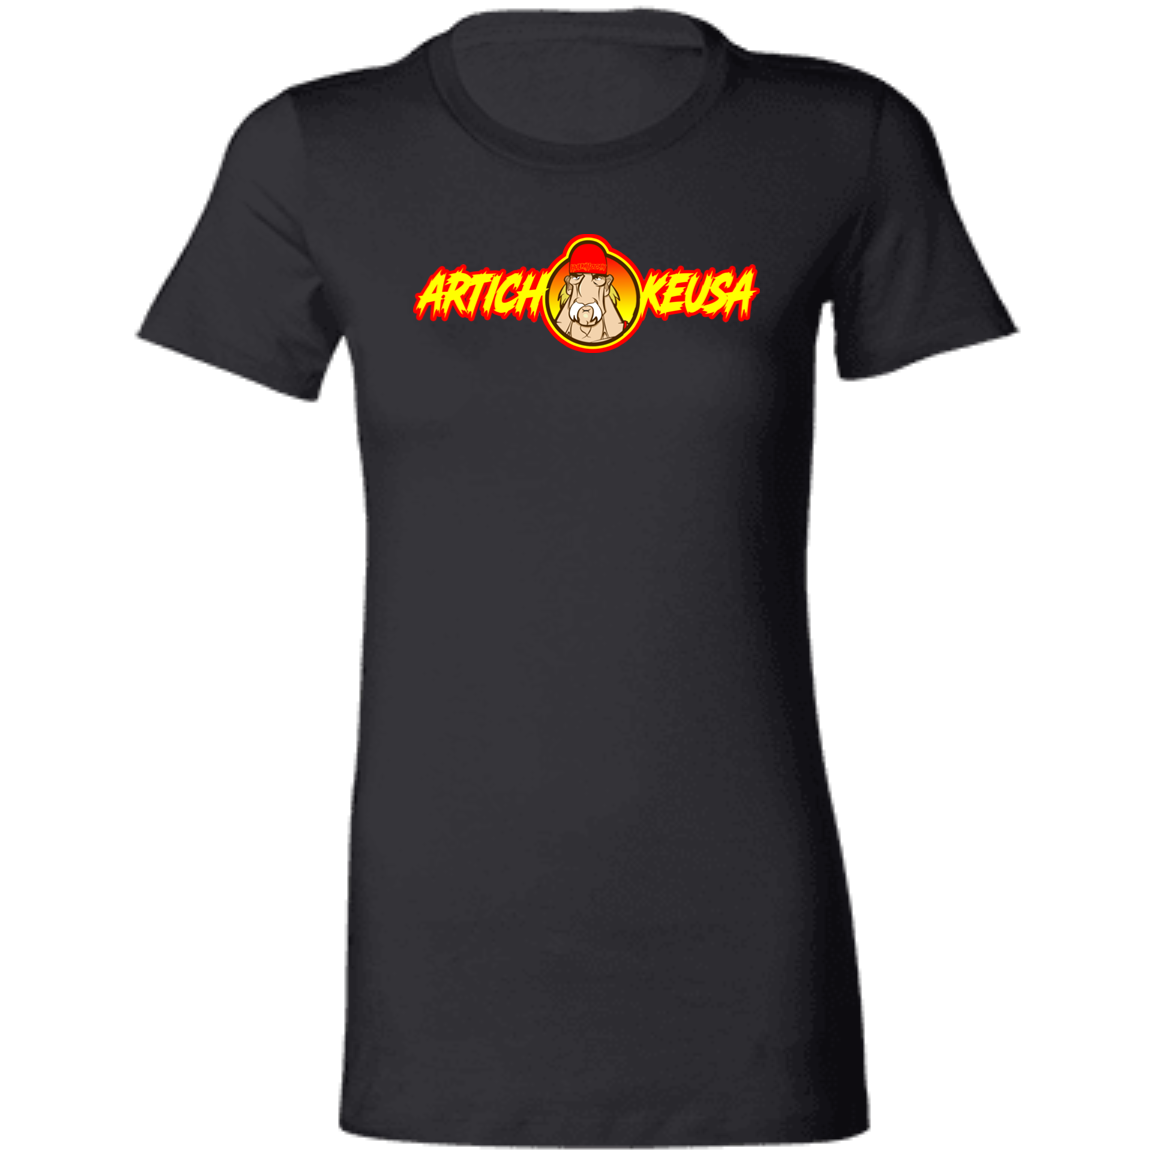 ArtichokeUSA Character and Font Design. Let’s Create Your Own Design Today. Fan Art. The Hulkster. Ladies' Favorite T-Shirt